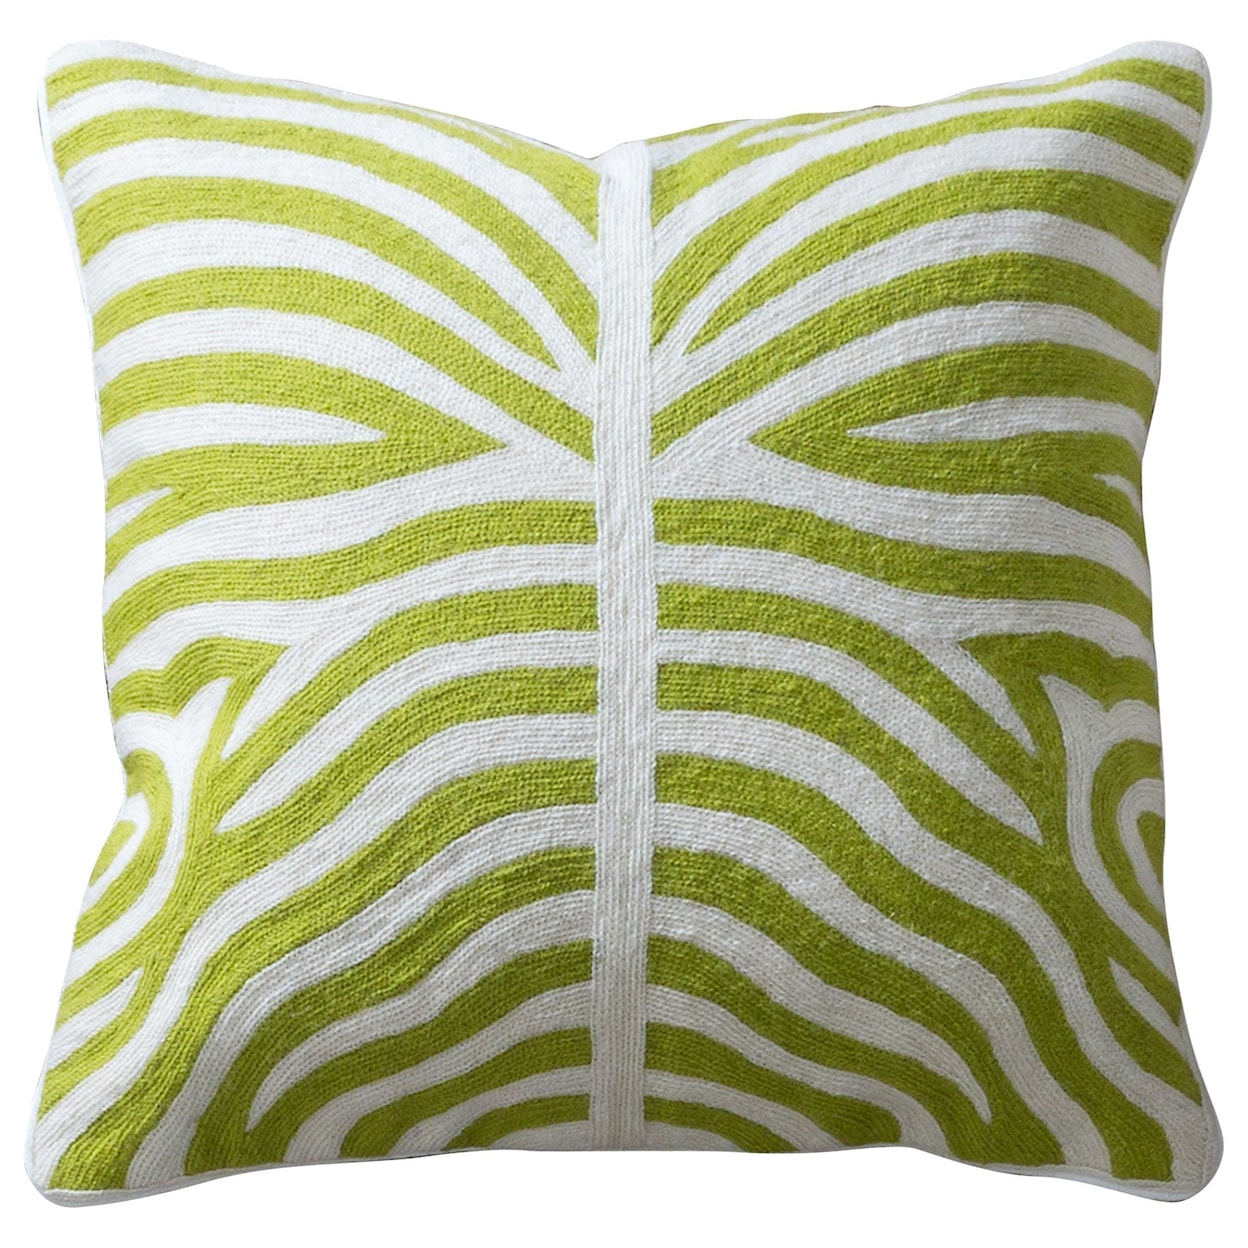 StyleCraft Accessories Green and White Accent Pillow